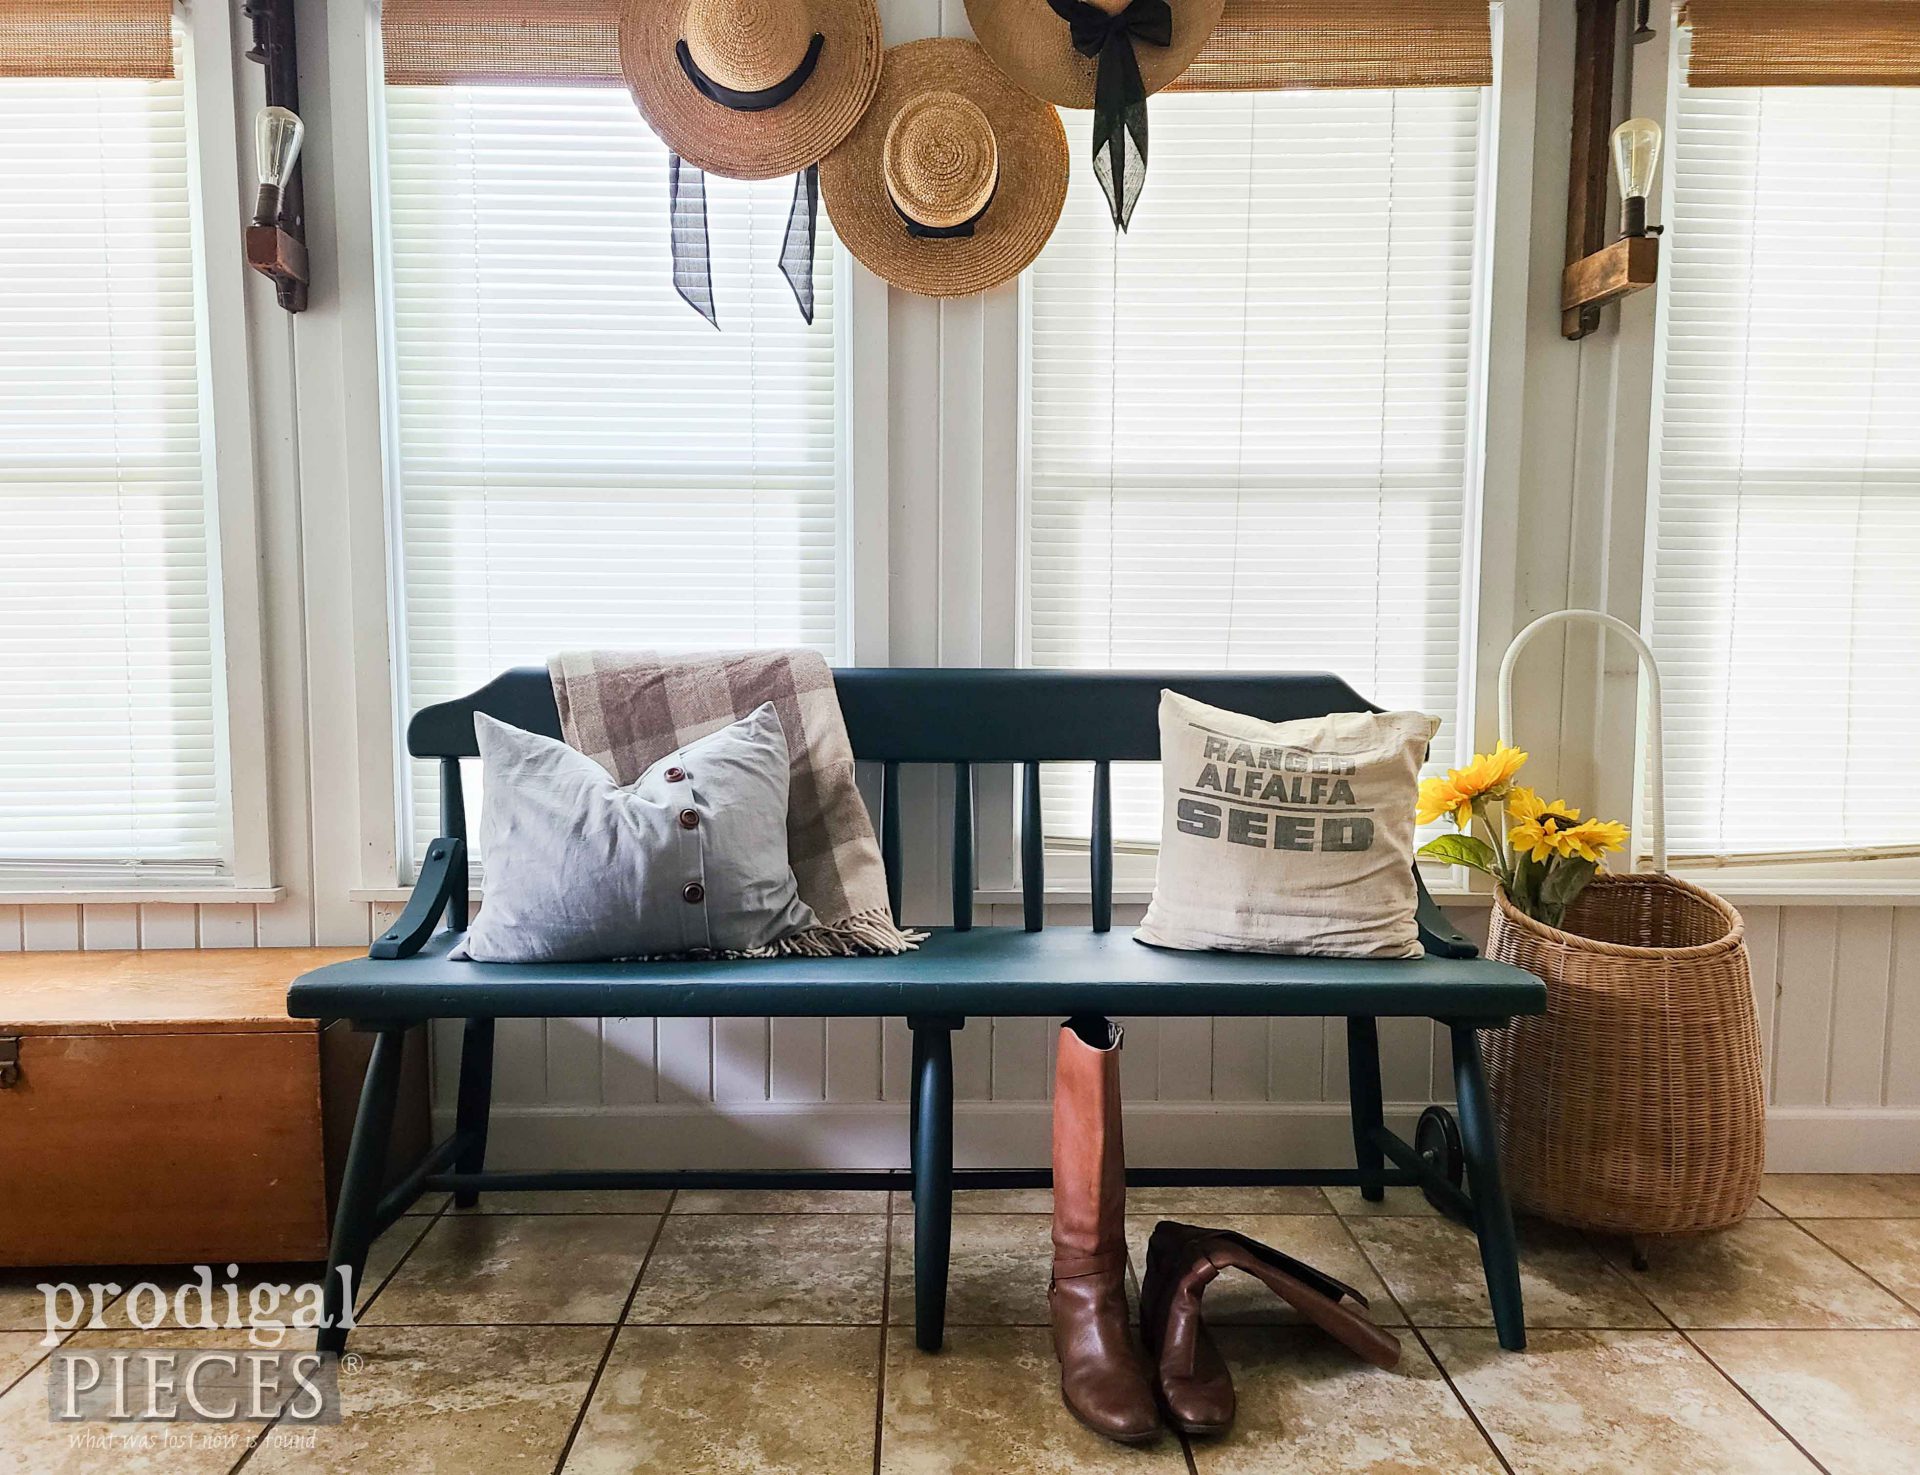 Farmhouse Entry Styling with Found Items by Larissa of Prodigal Pieces | prodigalpieces.com #prodigalpieces #farmhouse #entry #vintage